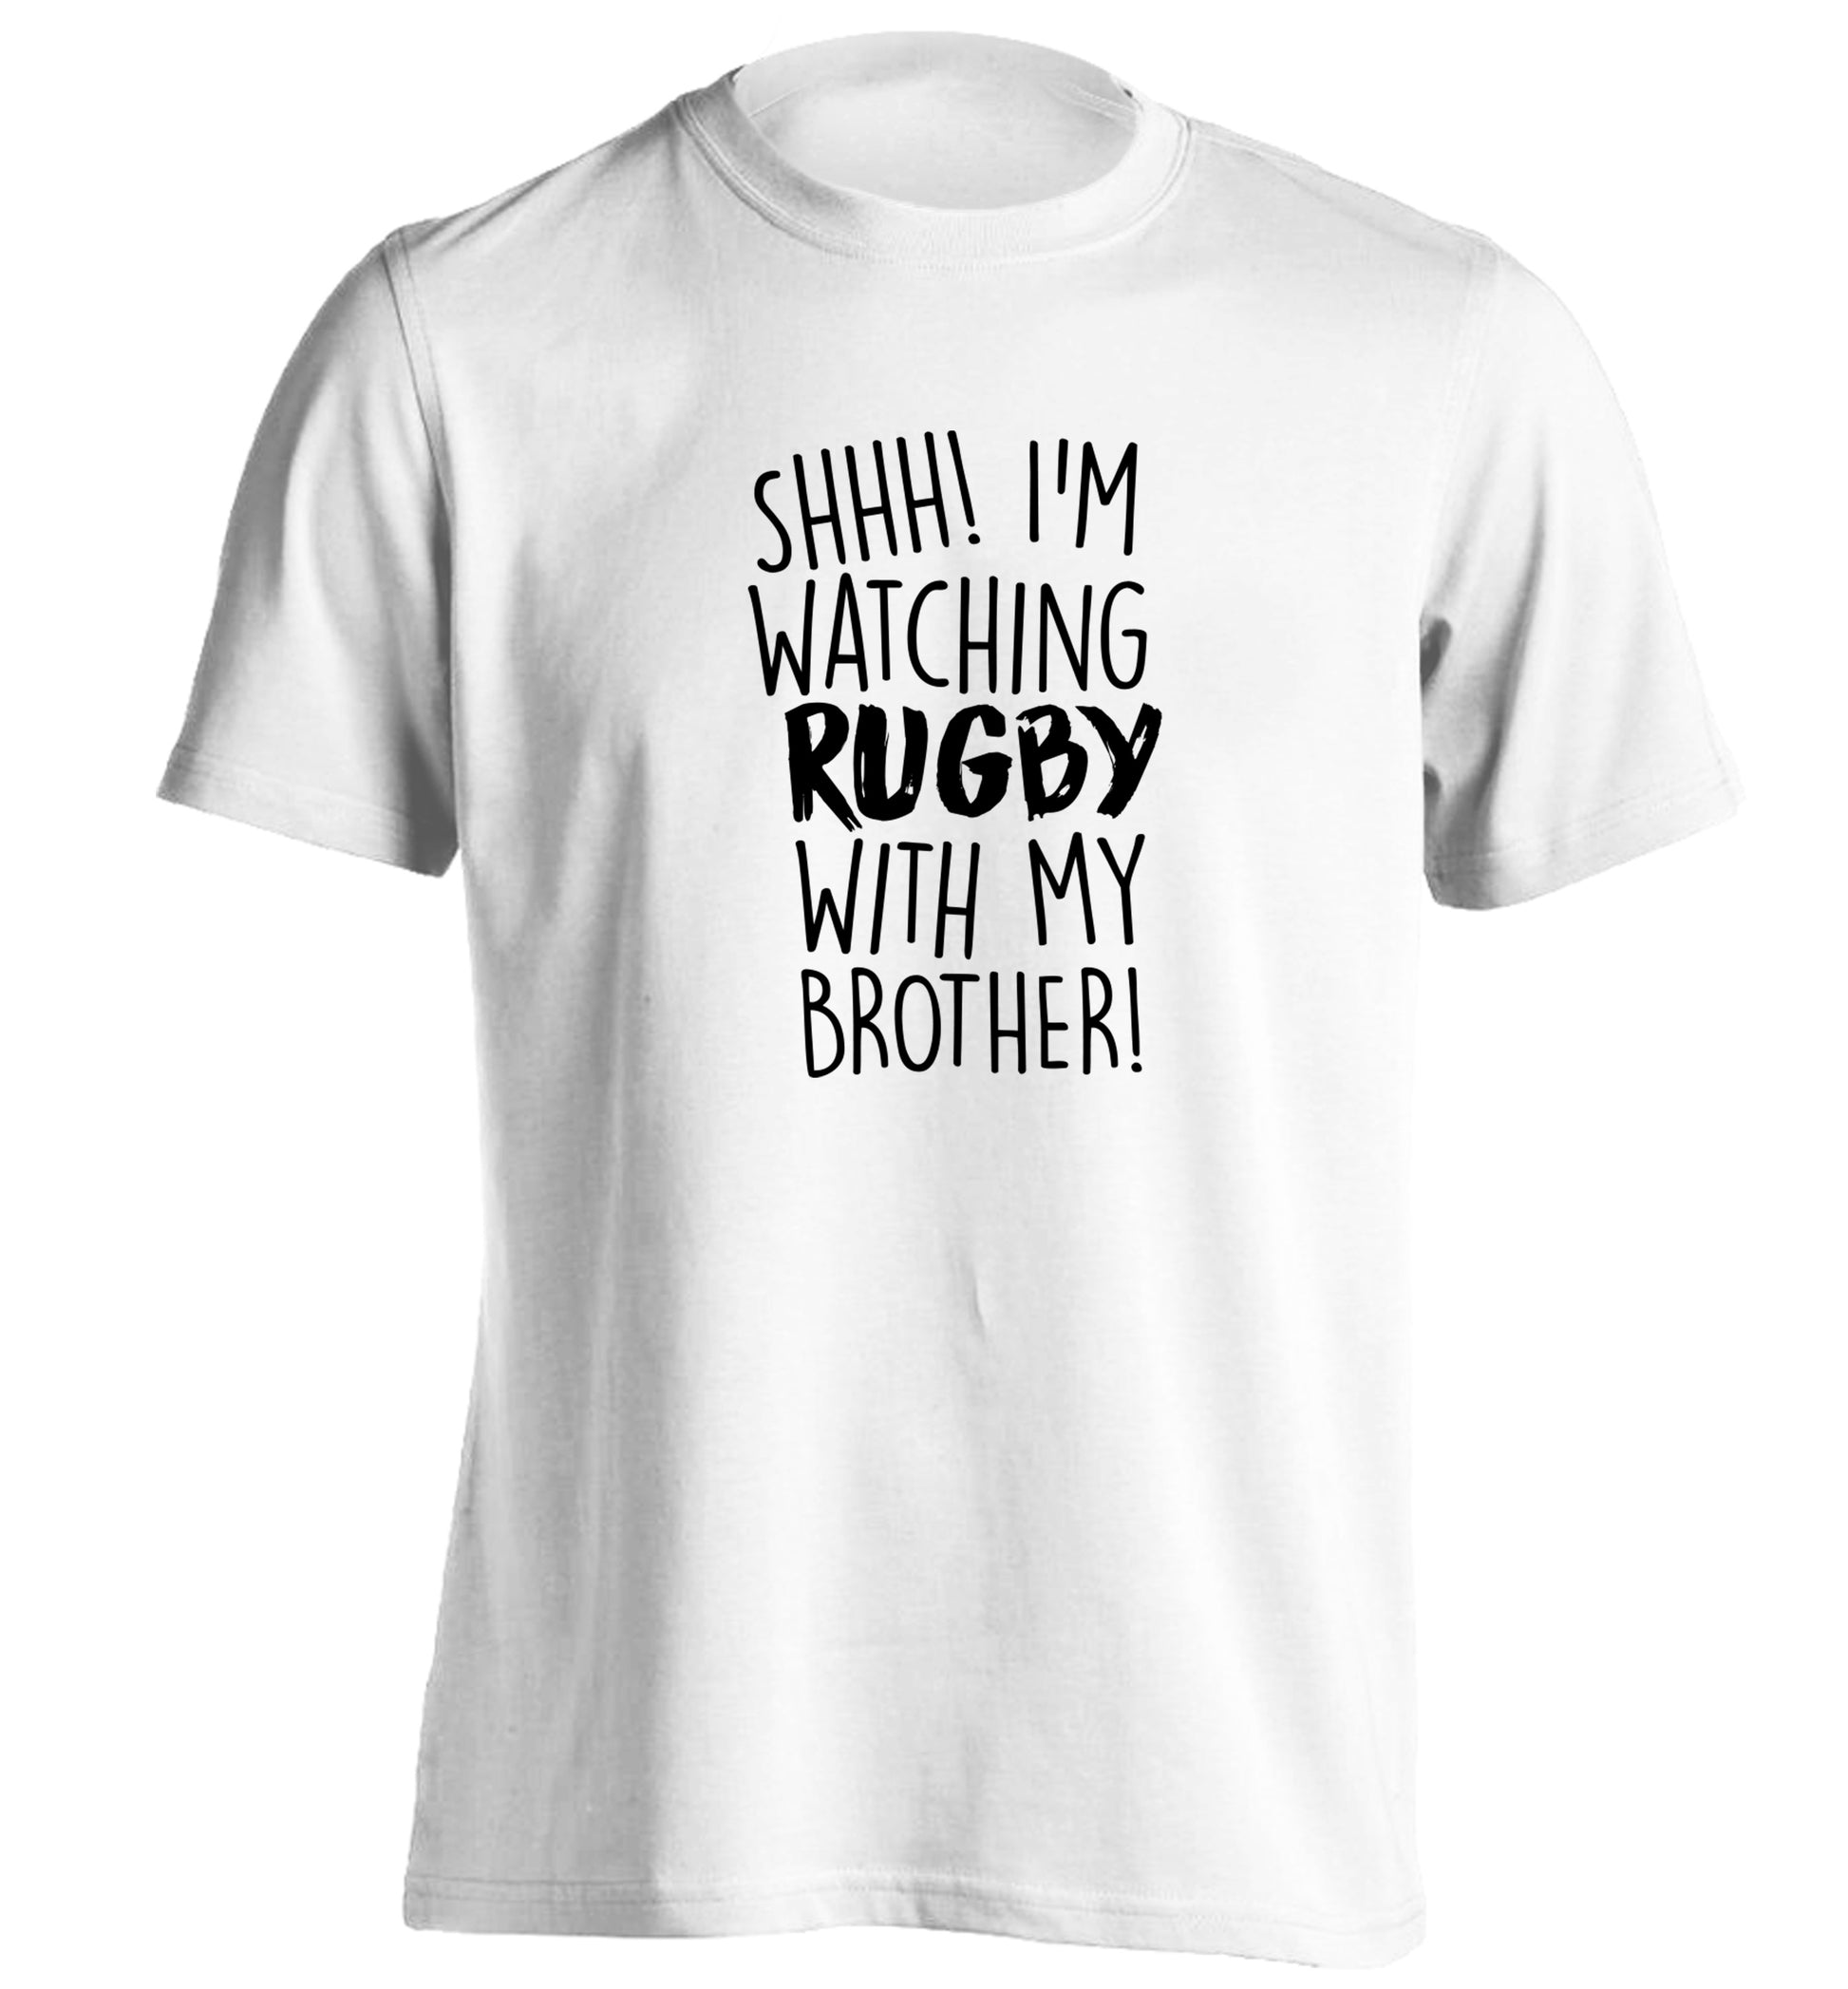 Shh... I'm watching rugby with my brother adults unisex white Tshirt 2XL